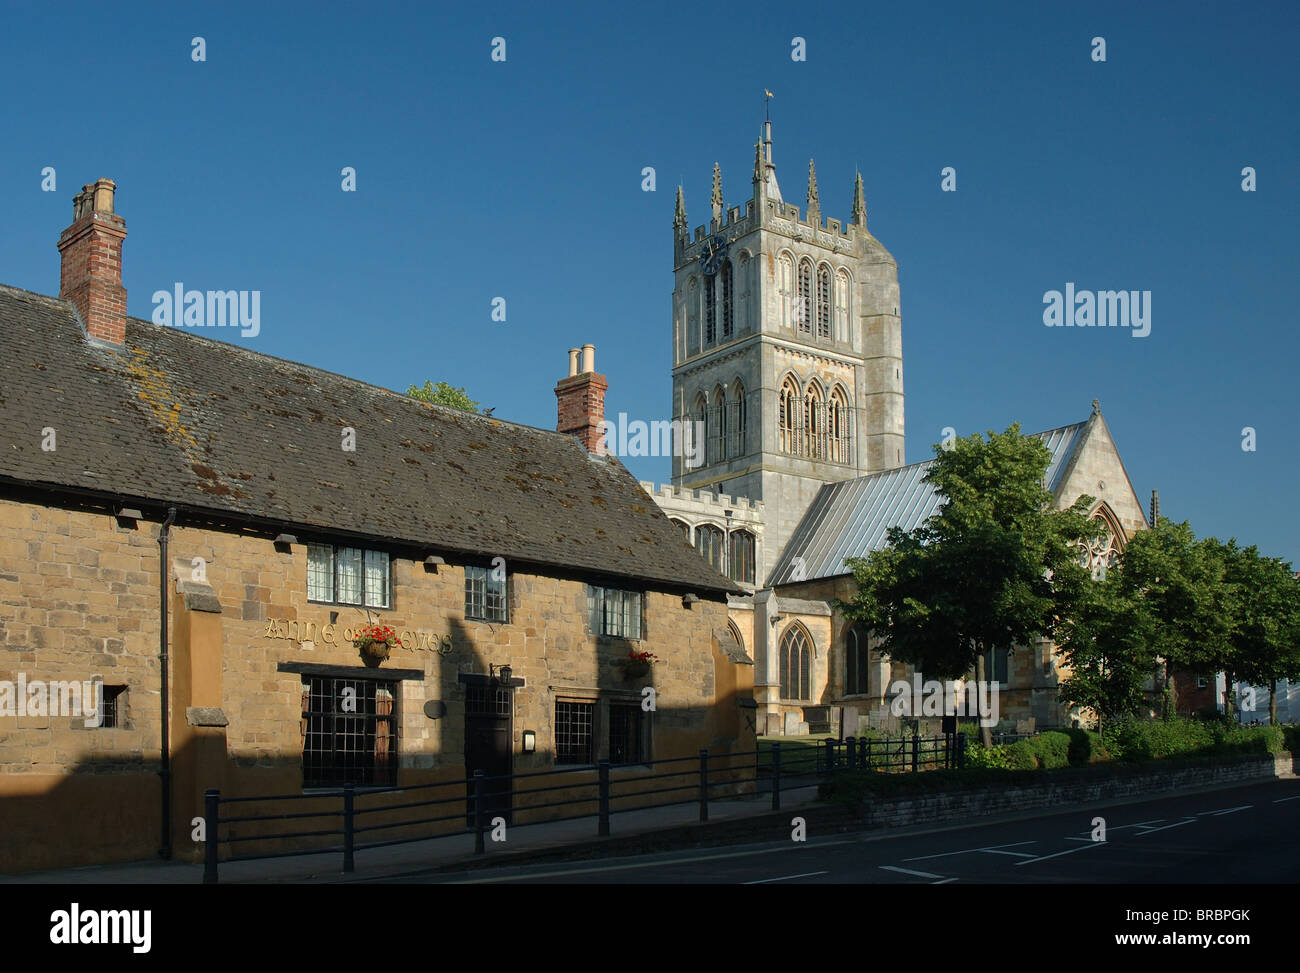 Anne of Cleves public house e St Marys chiesa, melton mowbray, leicestershire, England, Regno Unito Foto Stock